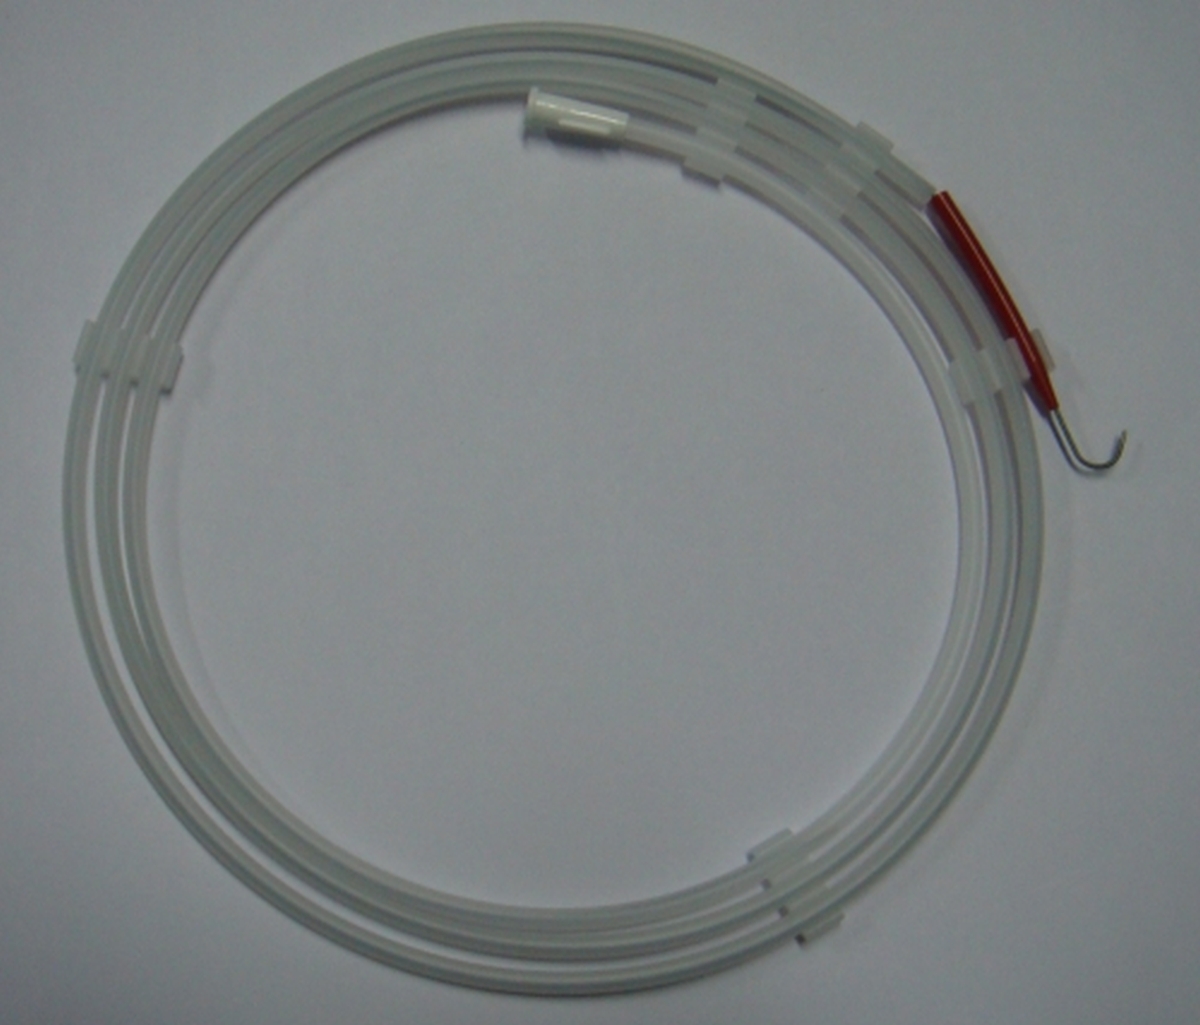 Guide wires for catheters and their sheath